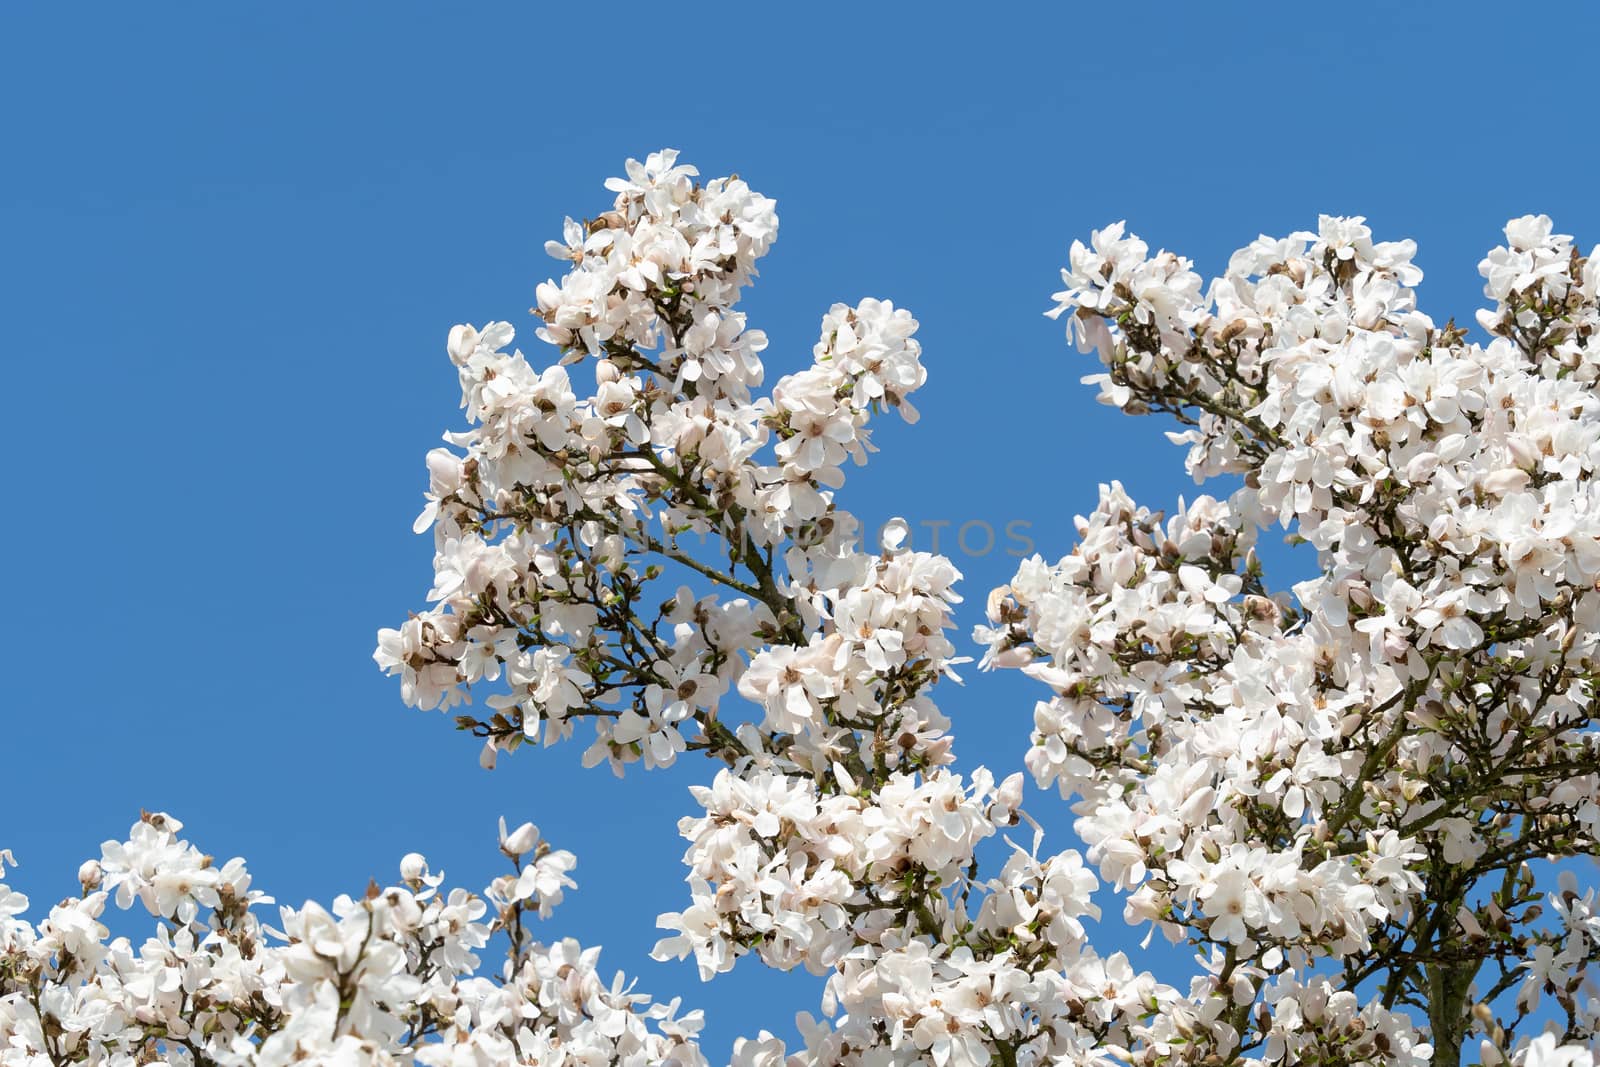 Magnolia white blossom tree flowers over blue sky. Spring floral by xtrekx